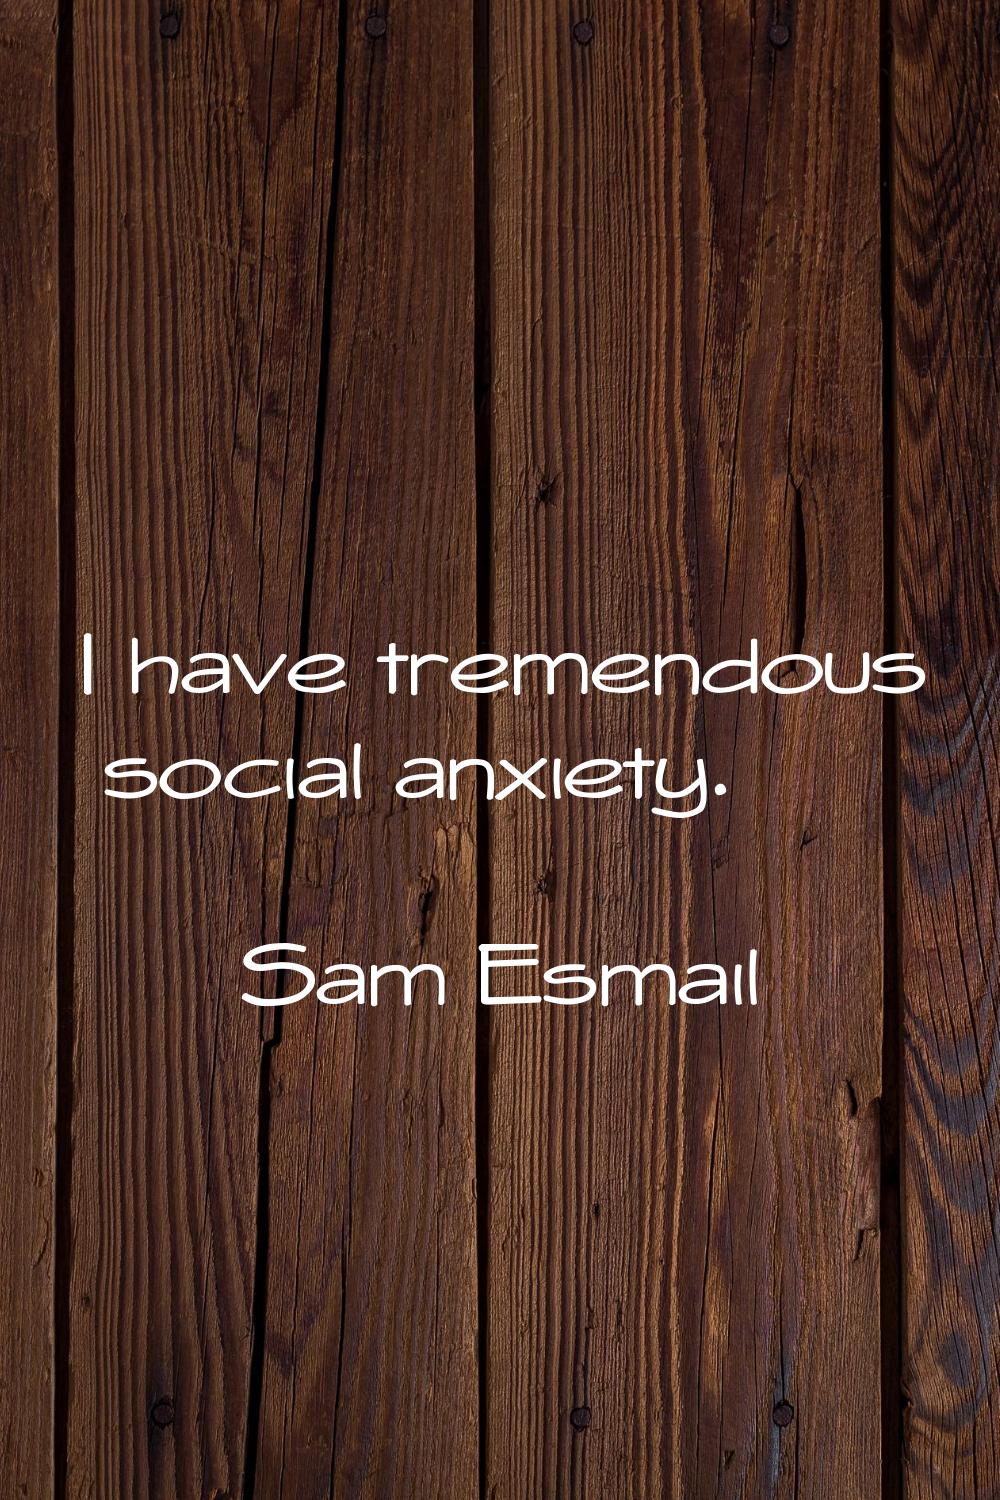 I have tremendous social anxiety.